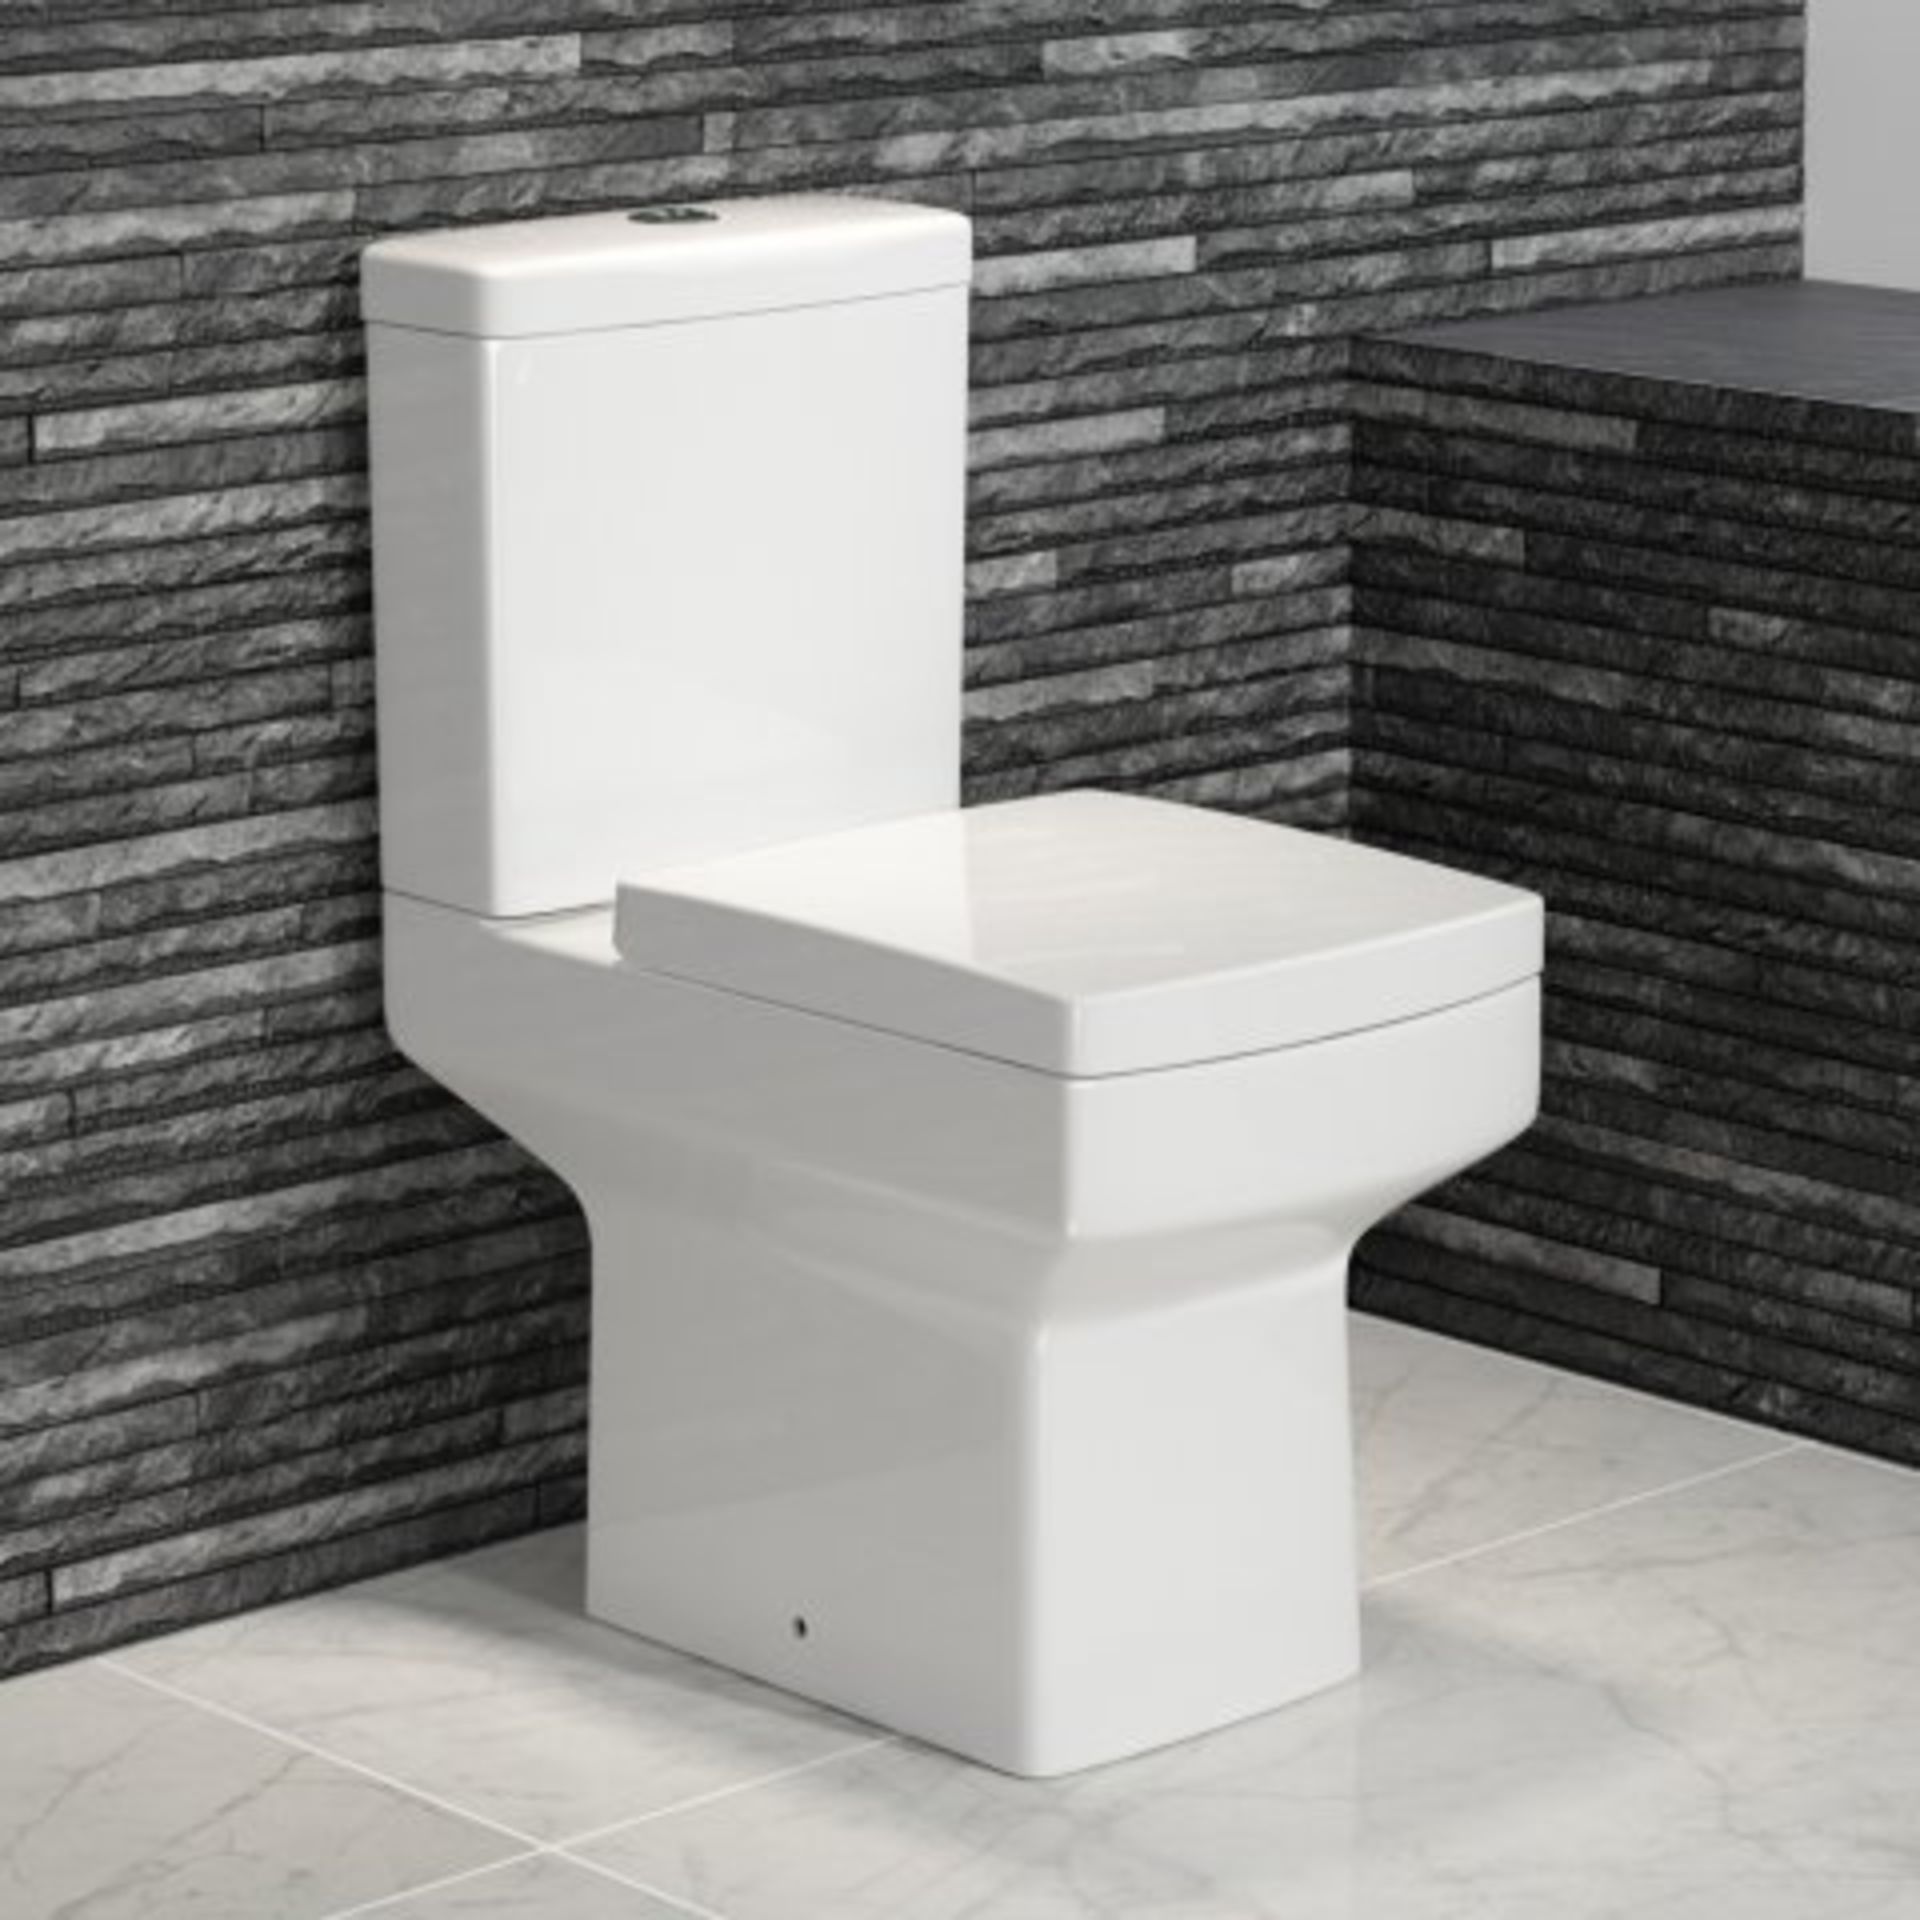 New Belfort Close Coupled Toilet RRP £549.99 Manufactured From High Quality White Vitreous Chi...